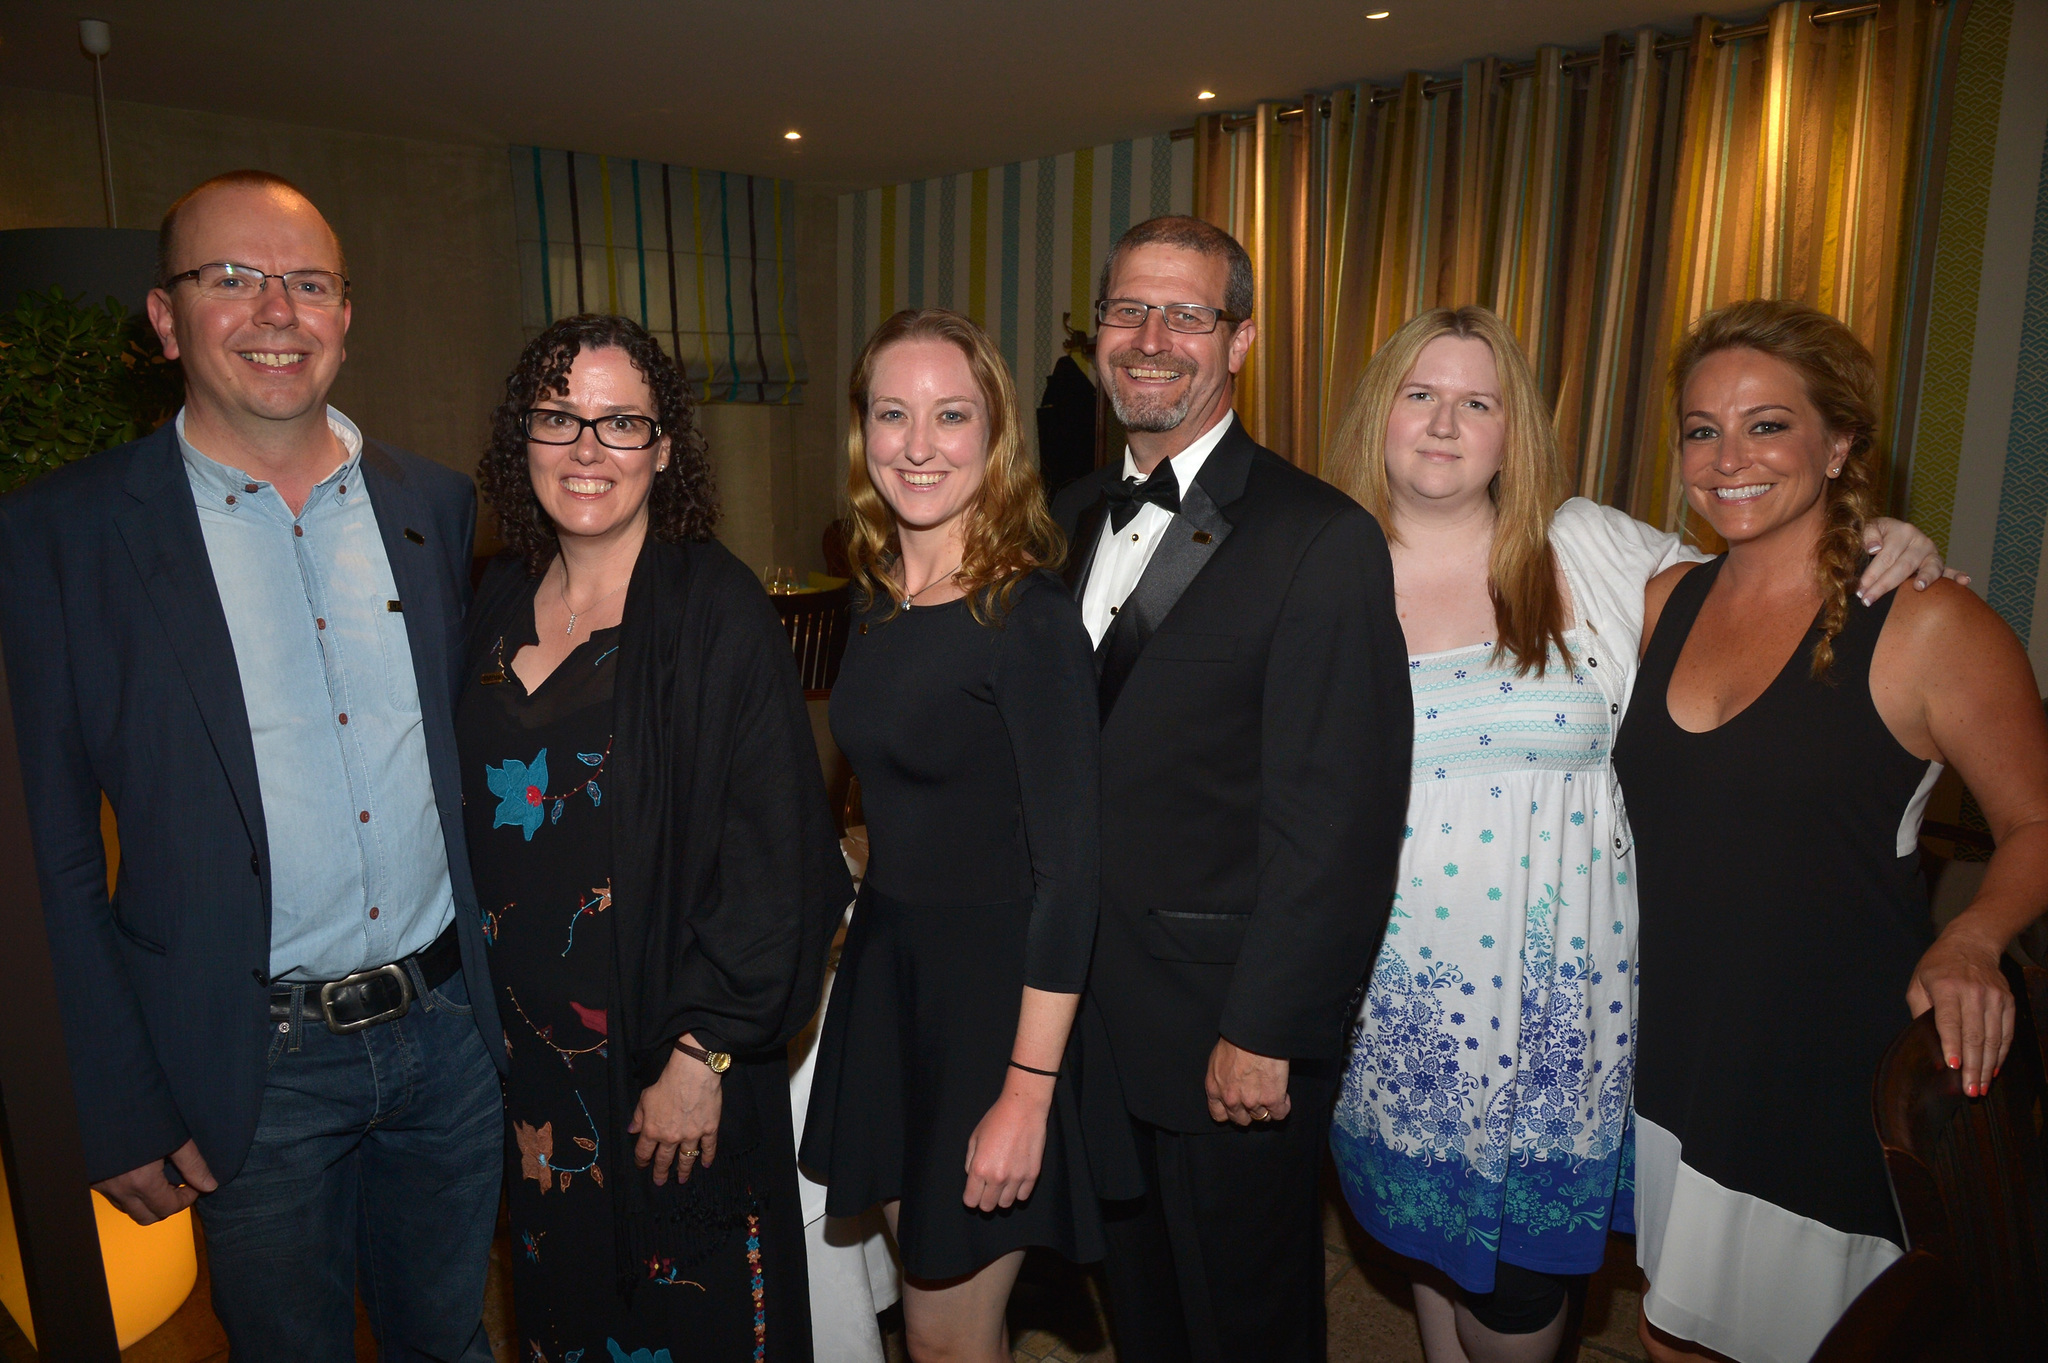 CEO and Founder of IMDB, Col Needham, Karen Needham, Natasha Bishop, writer Kevin Simanton and Head of PR and Marketing for IMDb, Emily Glassman attend IMDb's 2014 Cannes Film Festival Dinner Party at Restaurant Mantel on May 19, 2014 in Cannes, France.